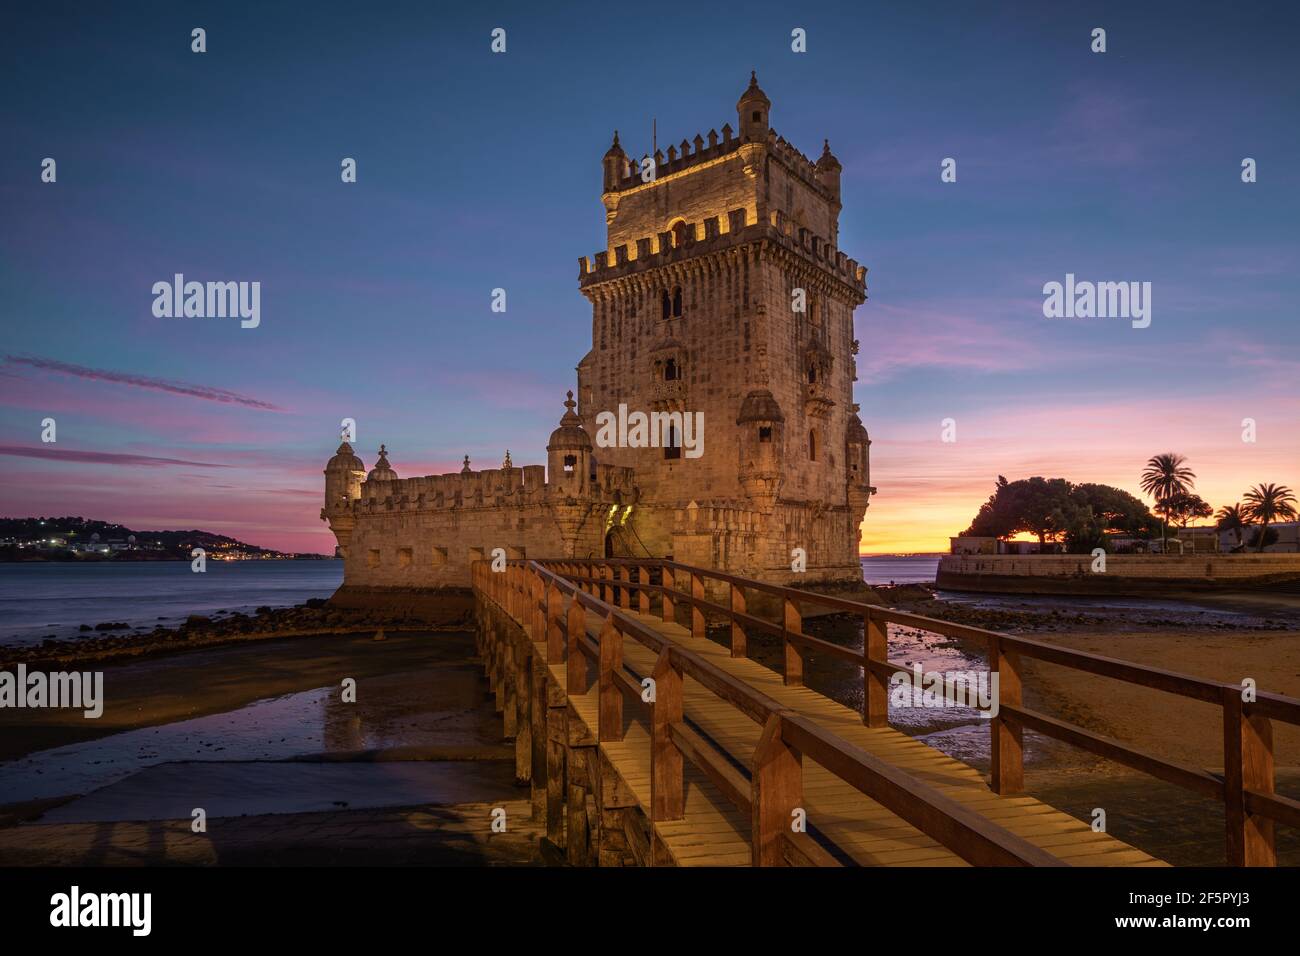 Belem Tower at sunset in Lisbon, Portugal. Stock Photo